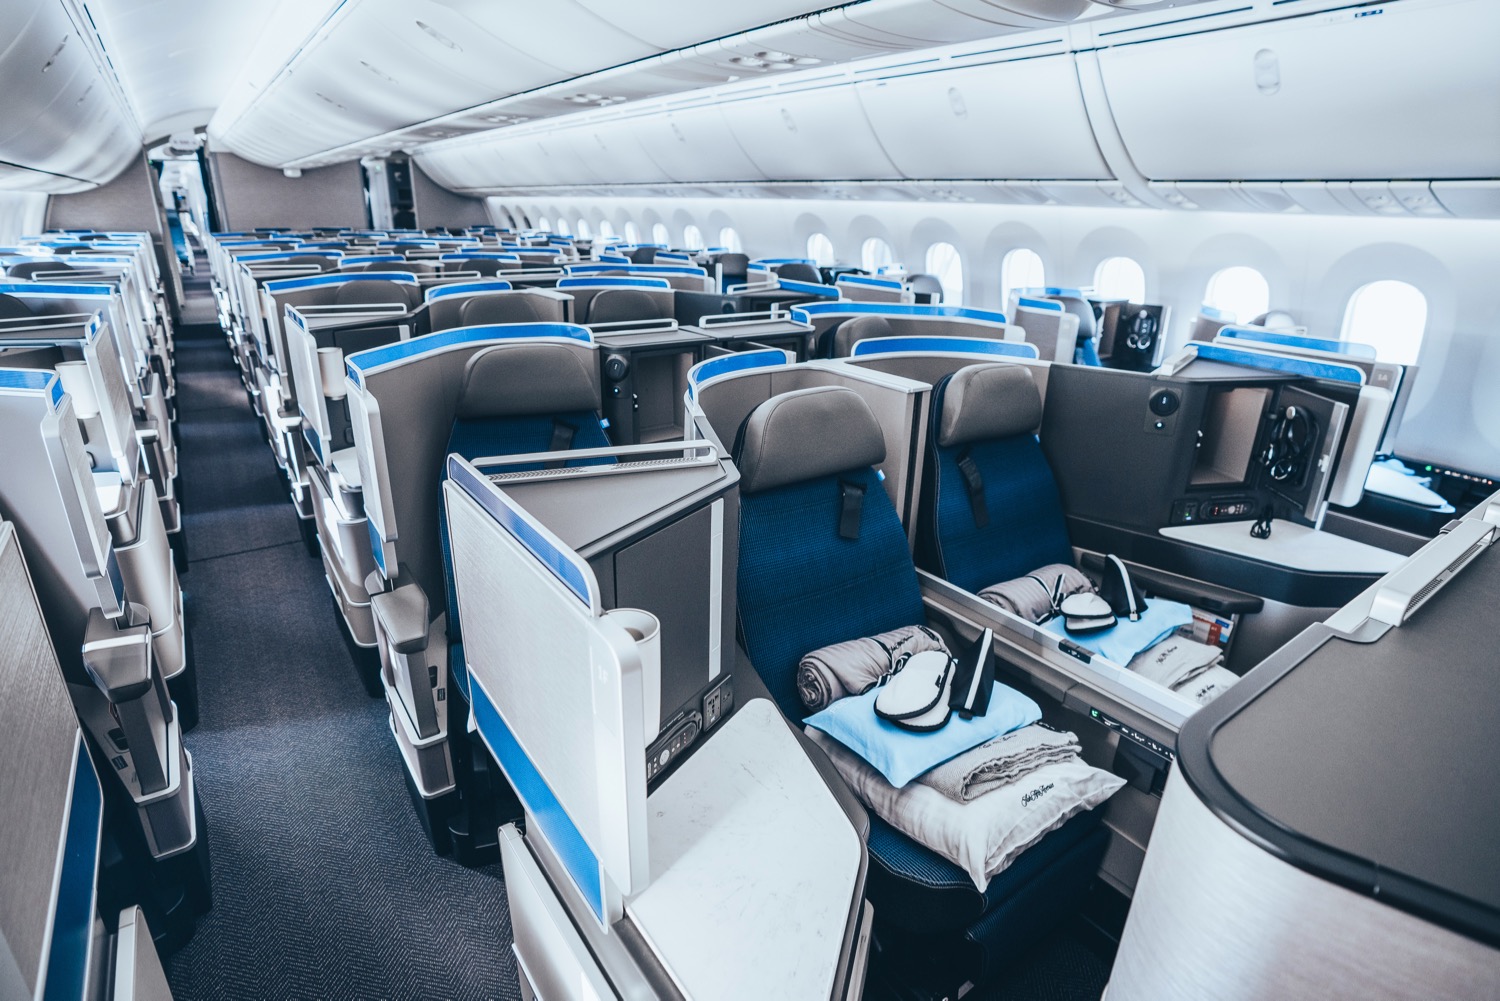 an airplane seats with blue seats and white seats